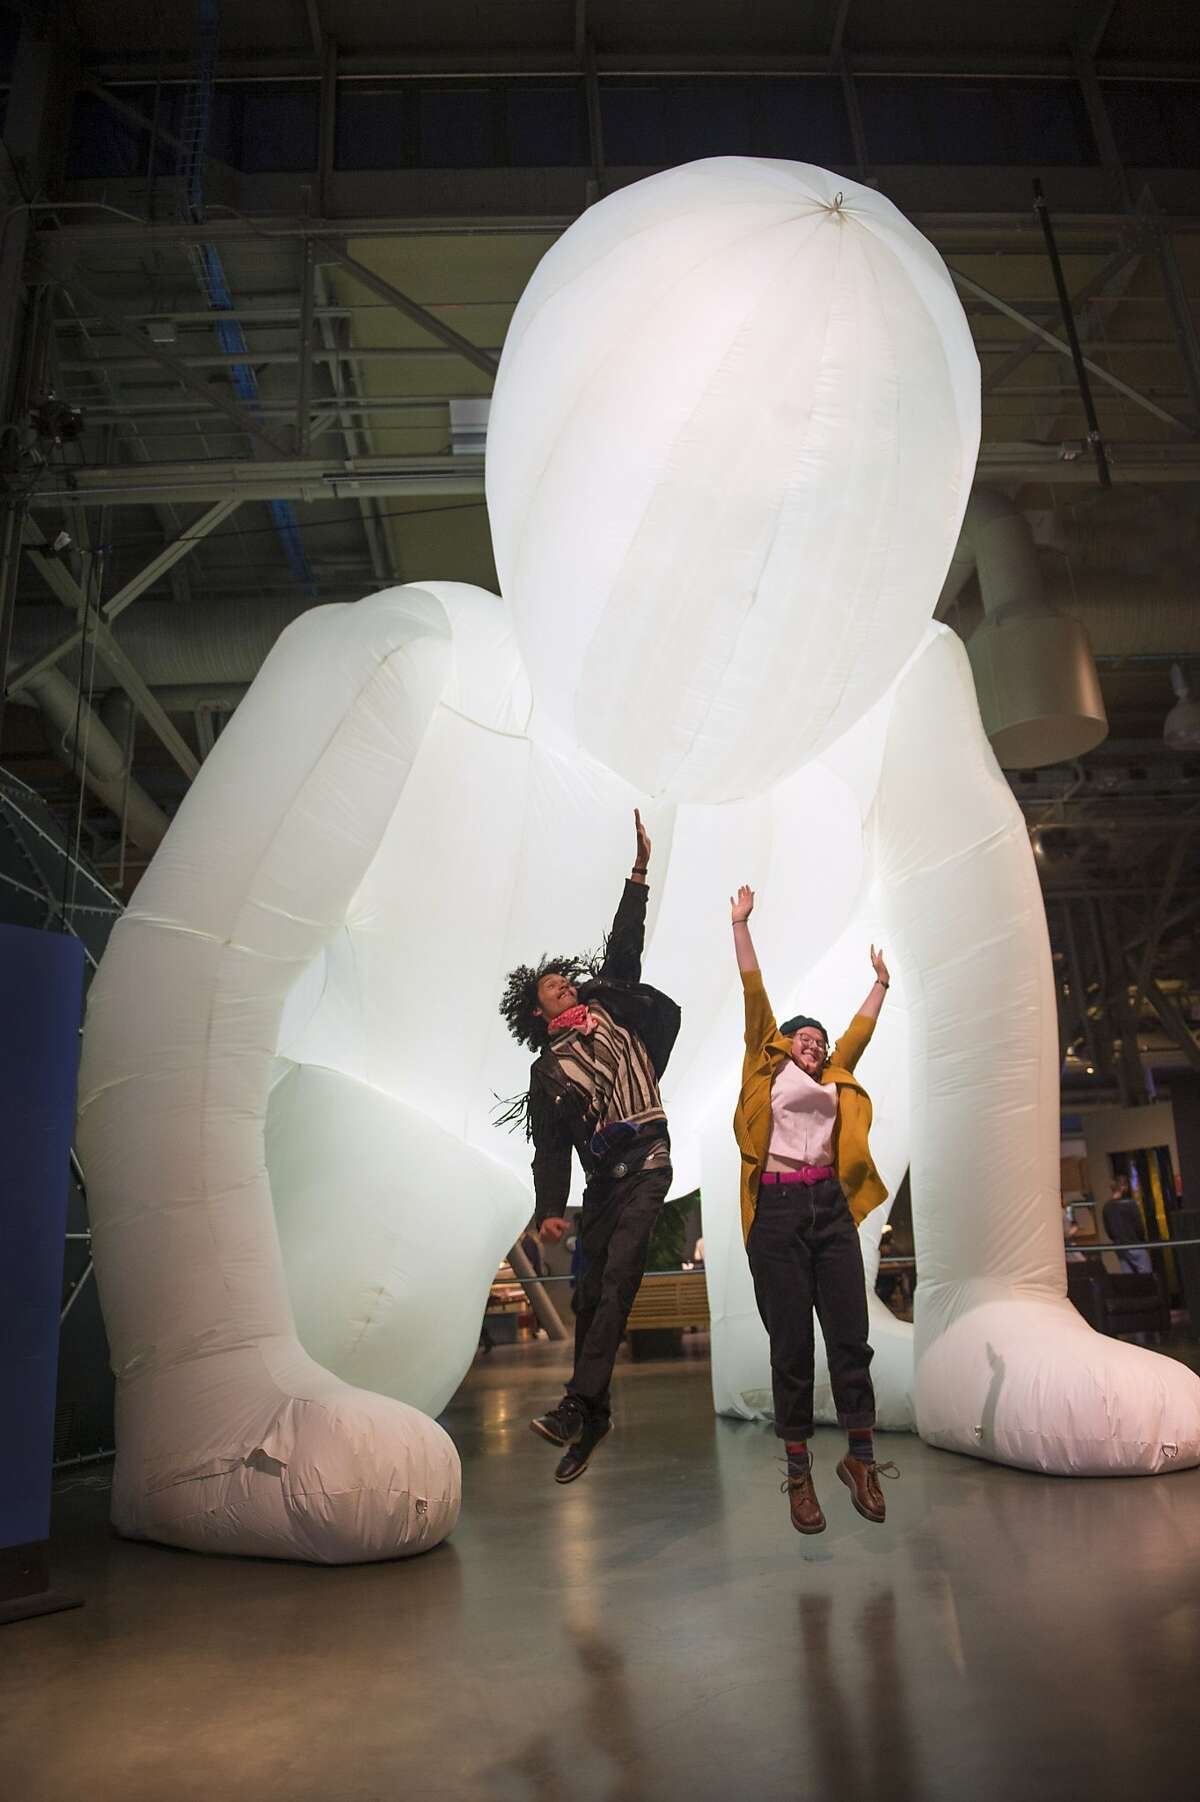 One of two giant inflatable light-filled humanoid figures from Australian artist Amanda Parer.